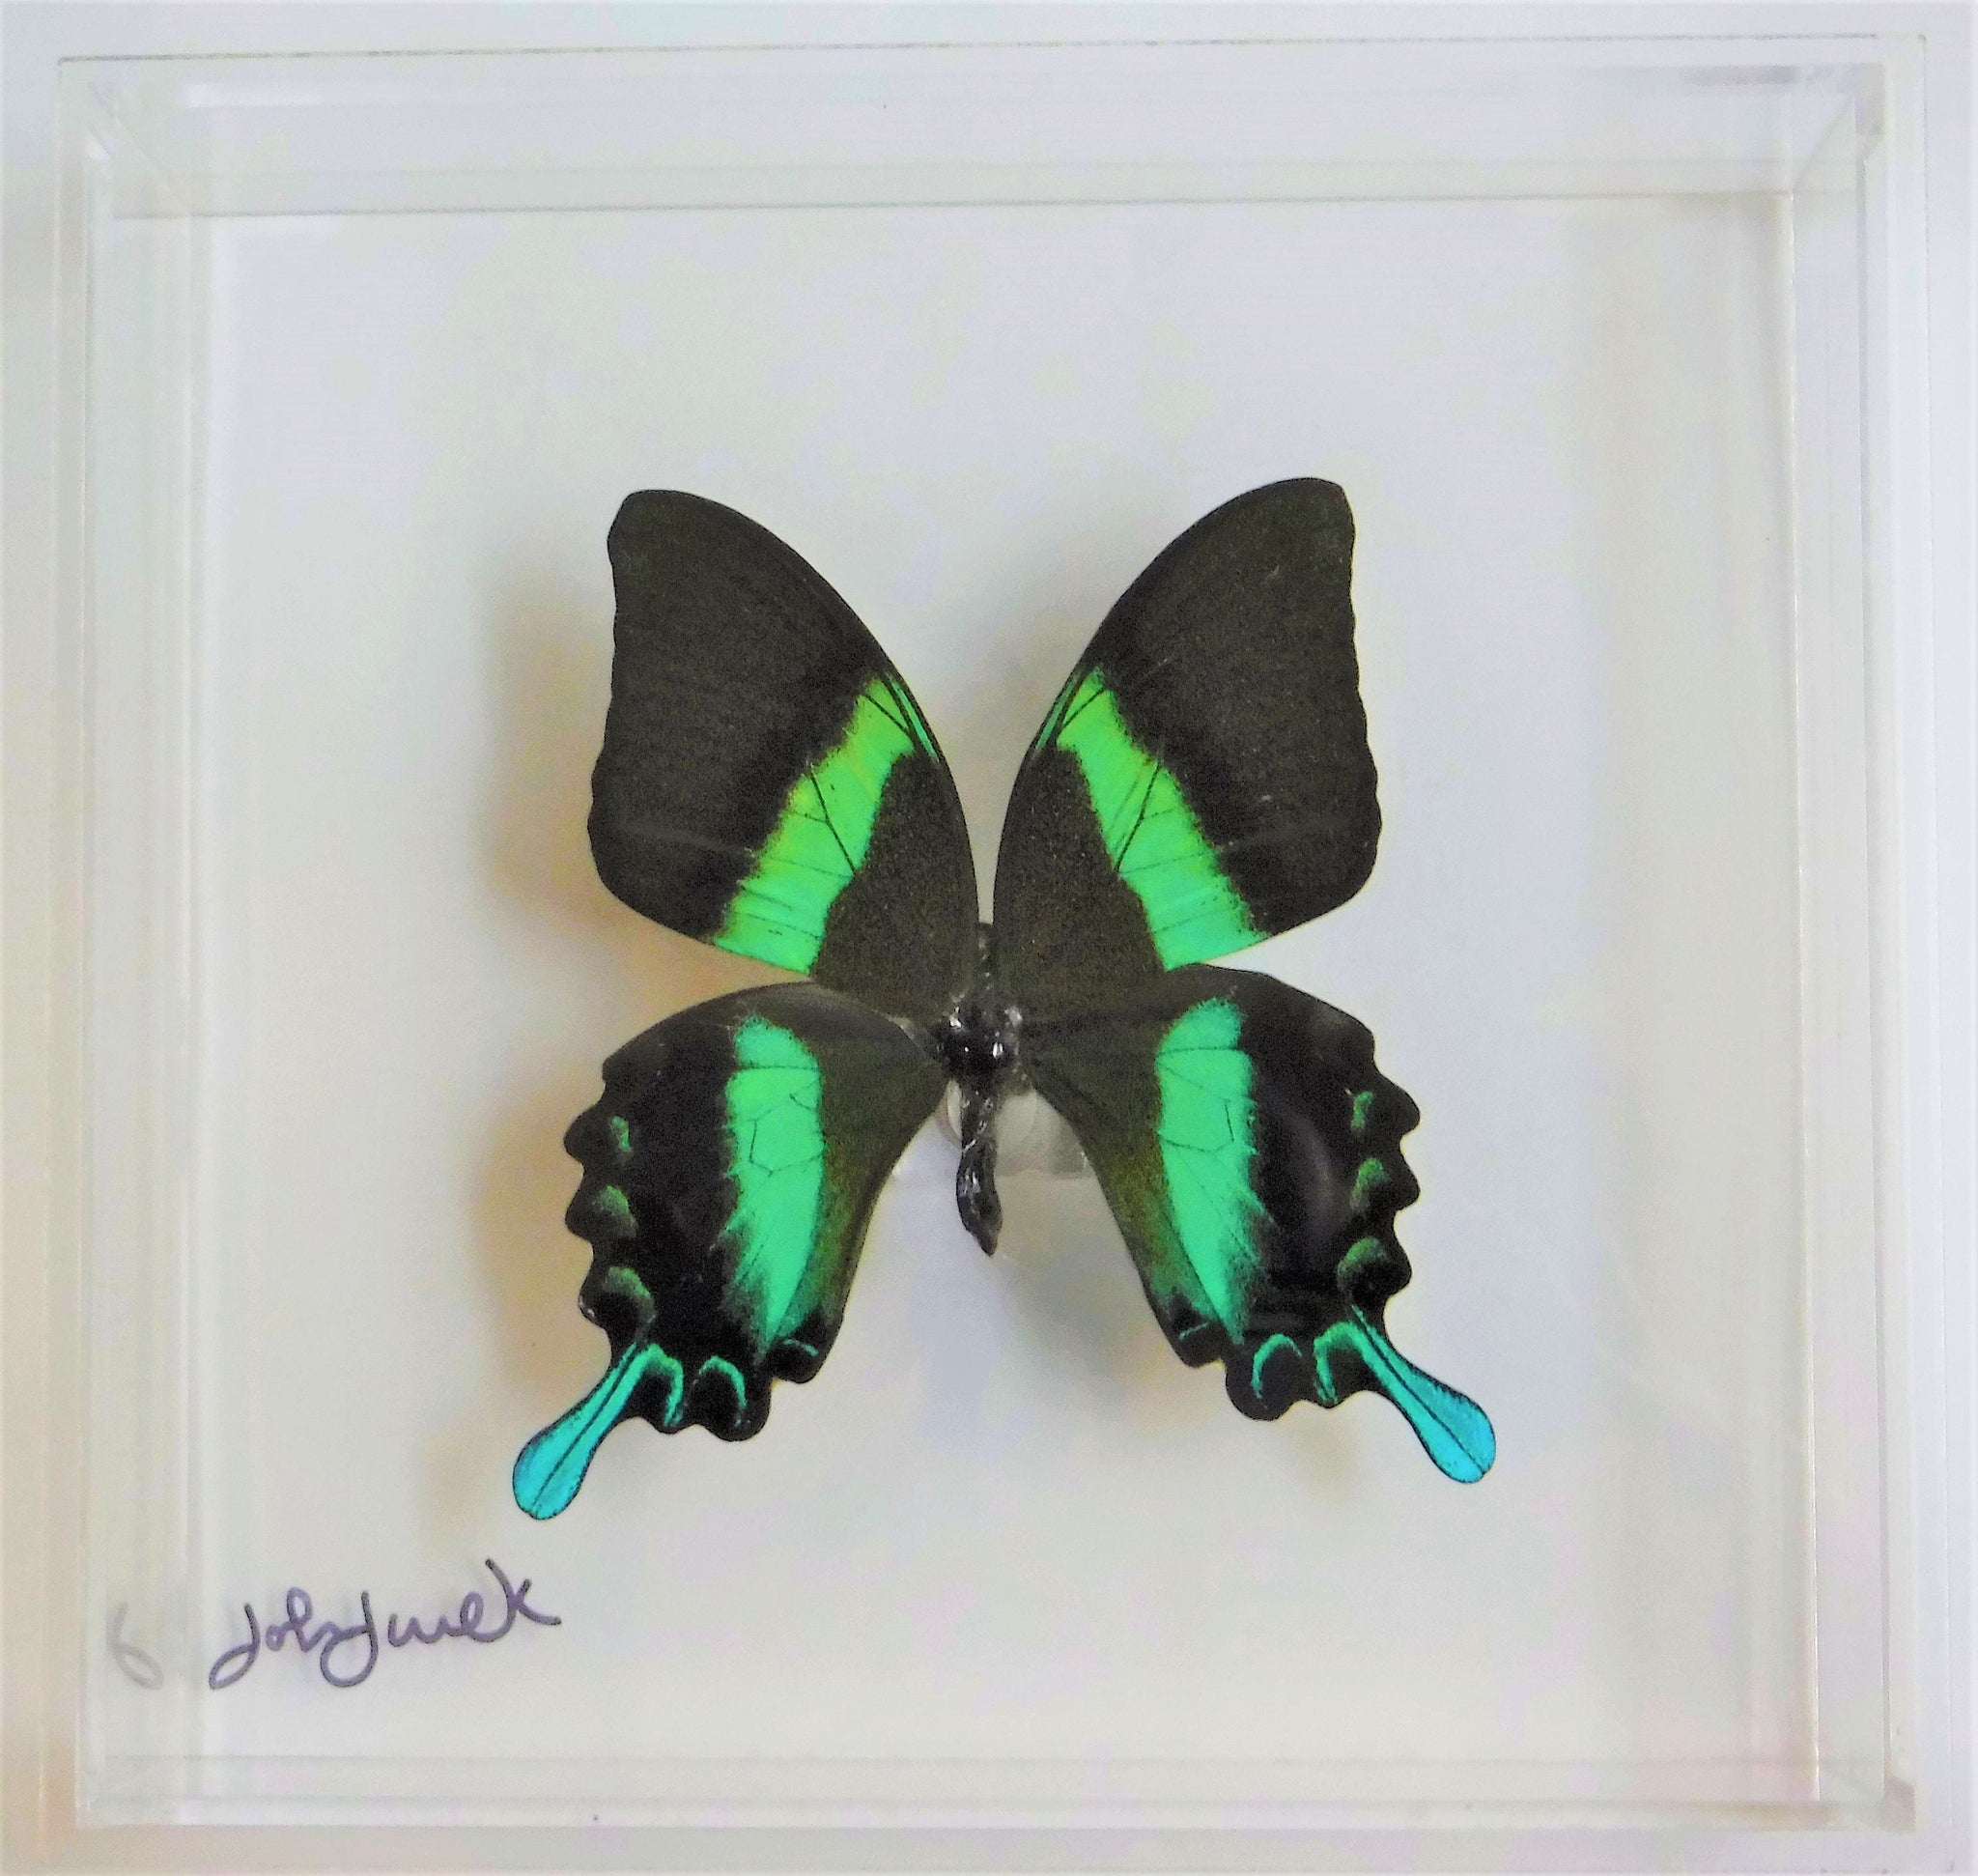 16x34x2.5 butterflies, butterfly taxidermy, butterfly collection